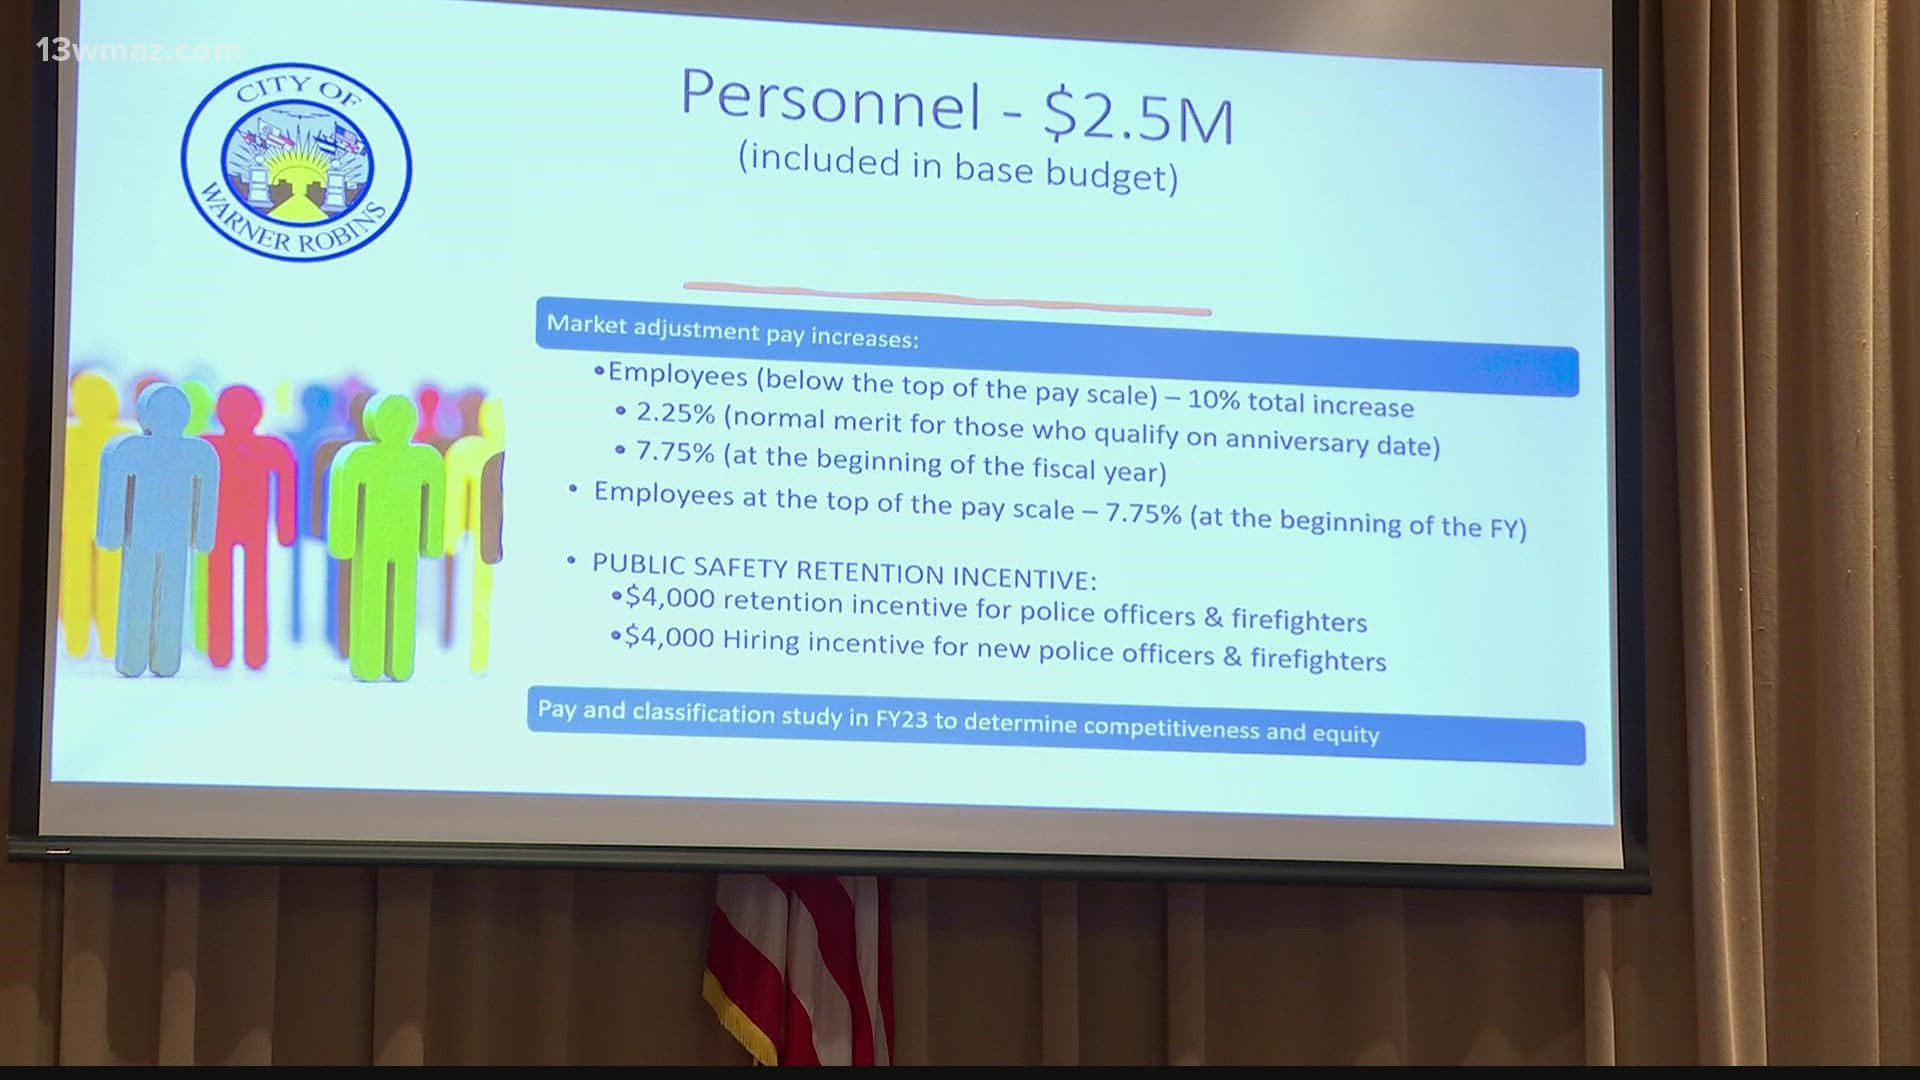 Warner Robins leaders made room for pay increases to some city employees and to public safety departments in the proposed budget for 2023.